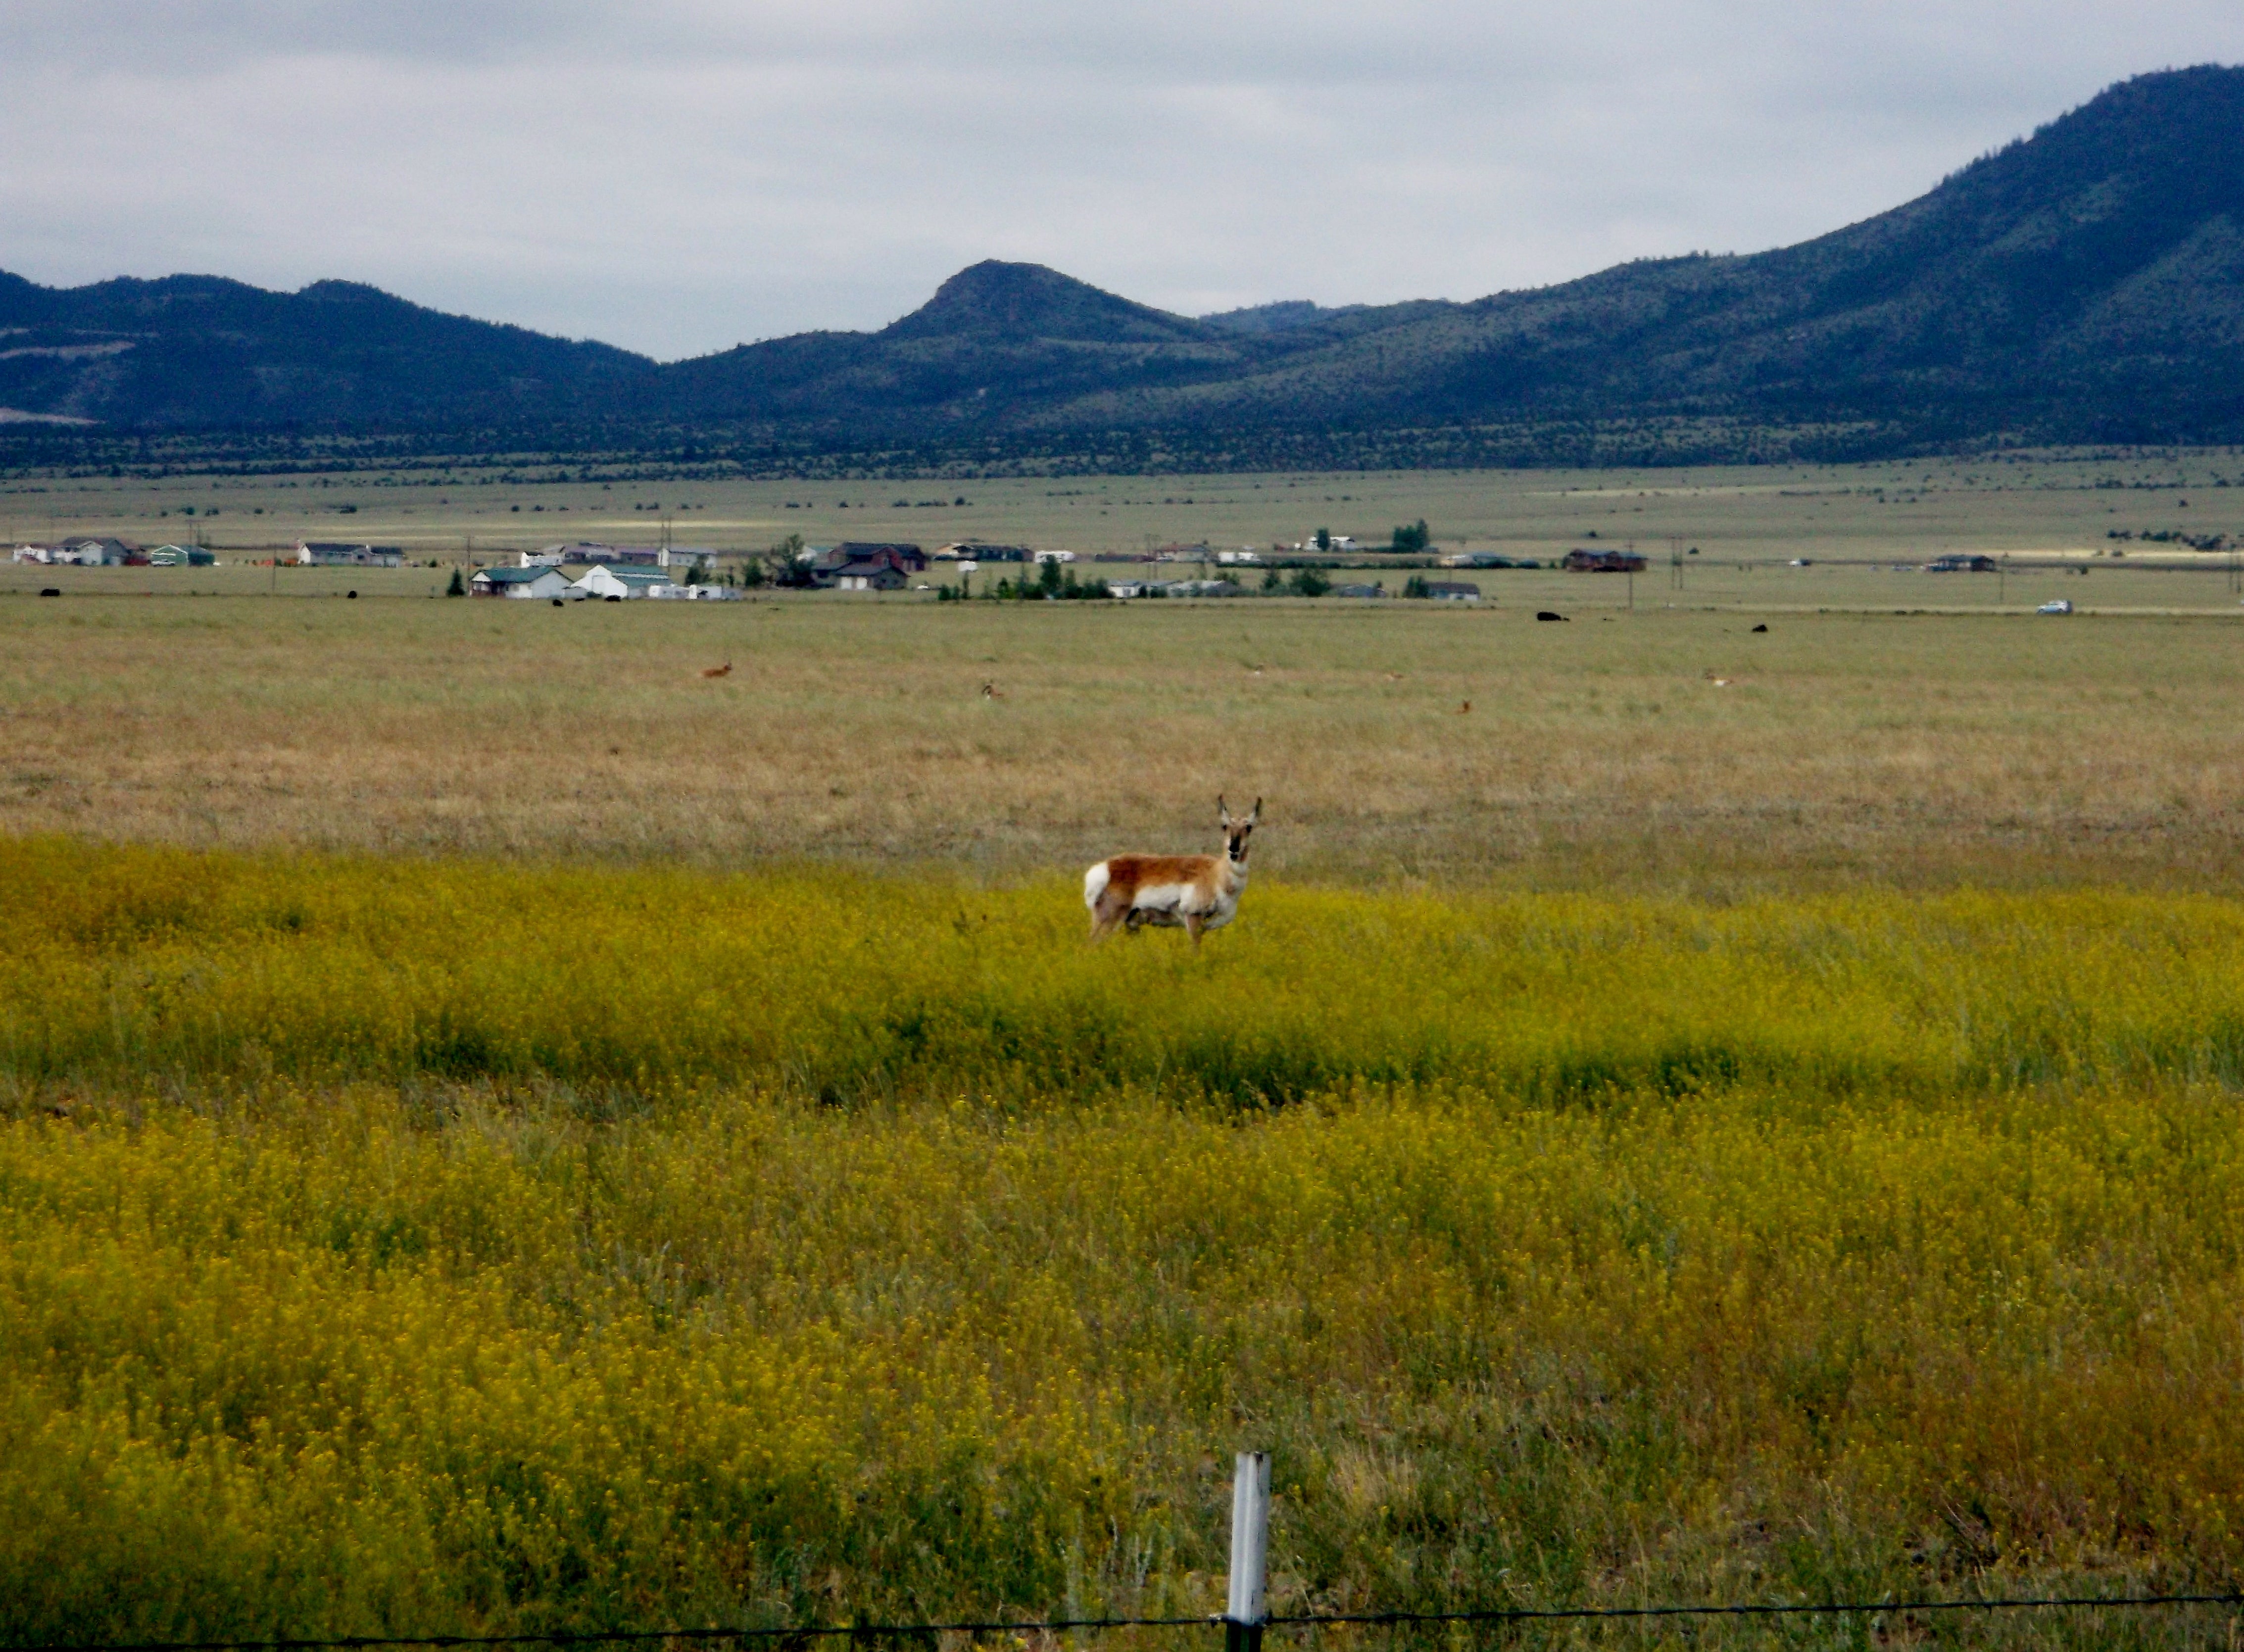 Antelope are frequently seen in this area along with local cattle.  